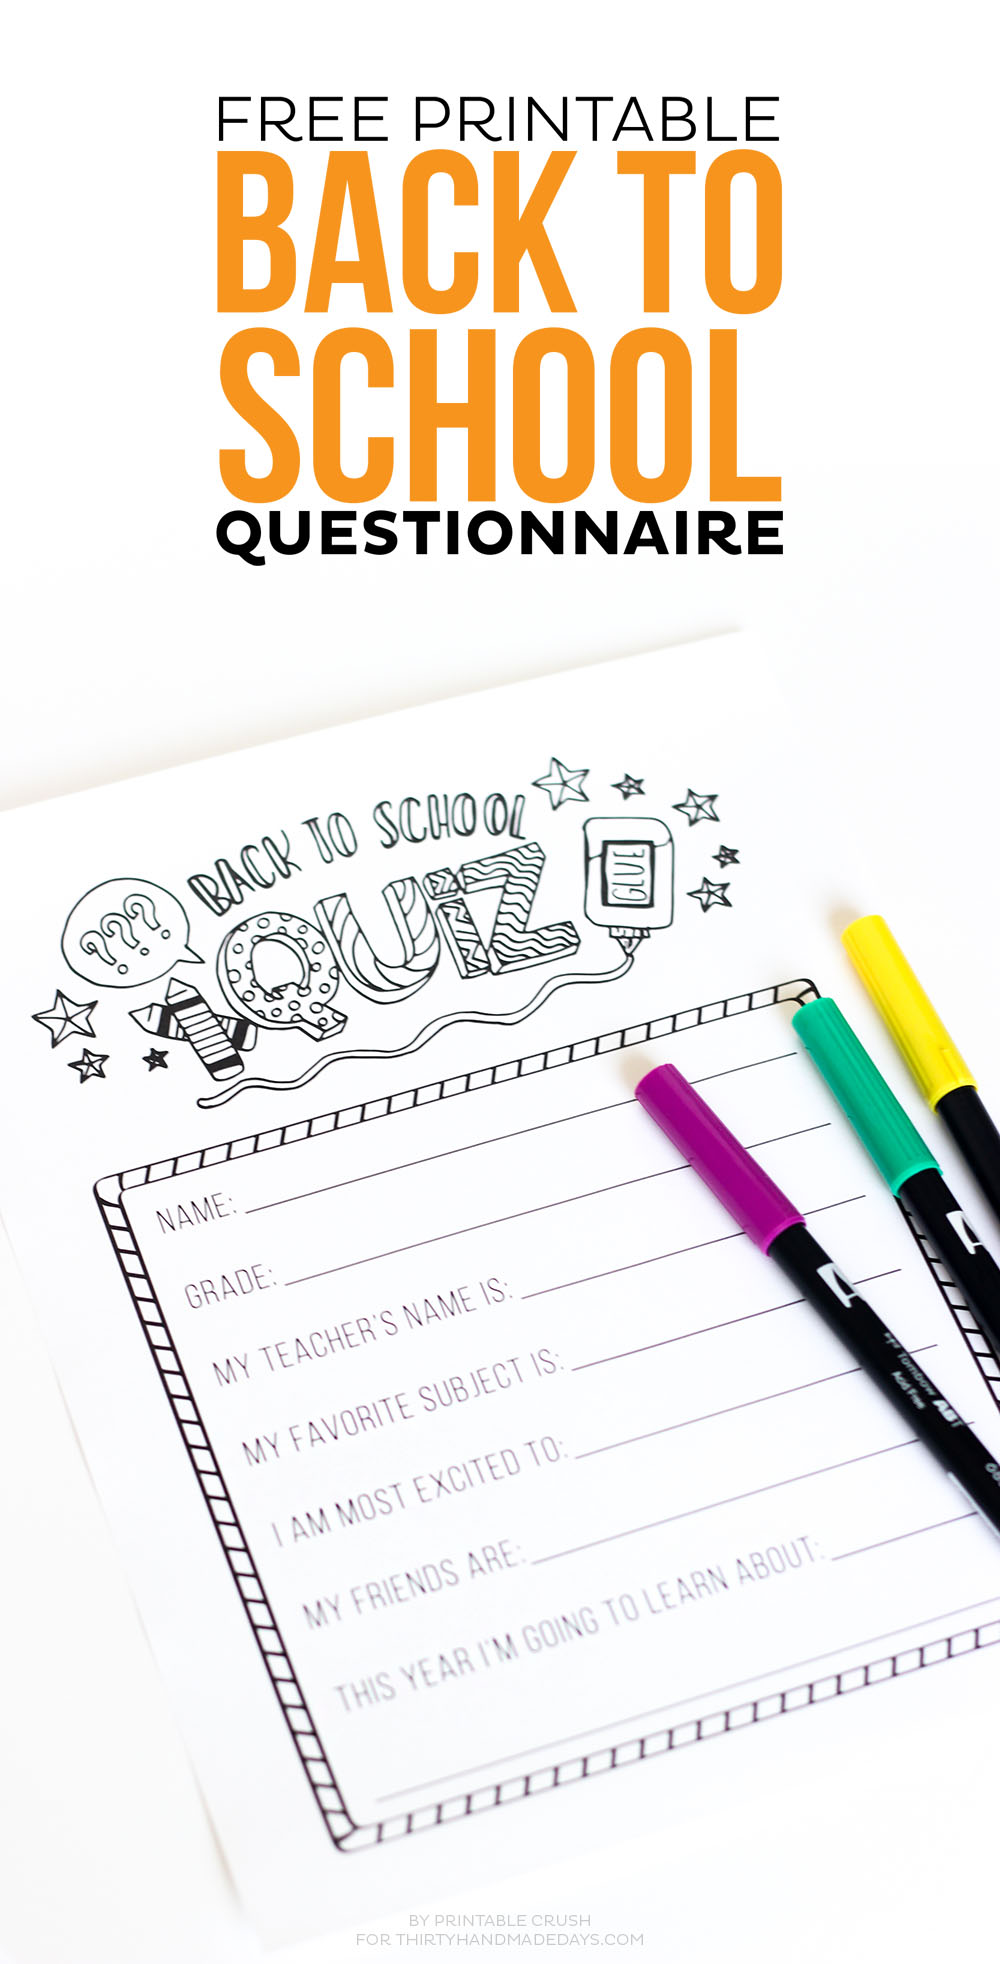 This FREE Printable Back to School Questionnaire is a great way to keep memories. Plus, it doubles as a coloring page so kids can be creative!